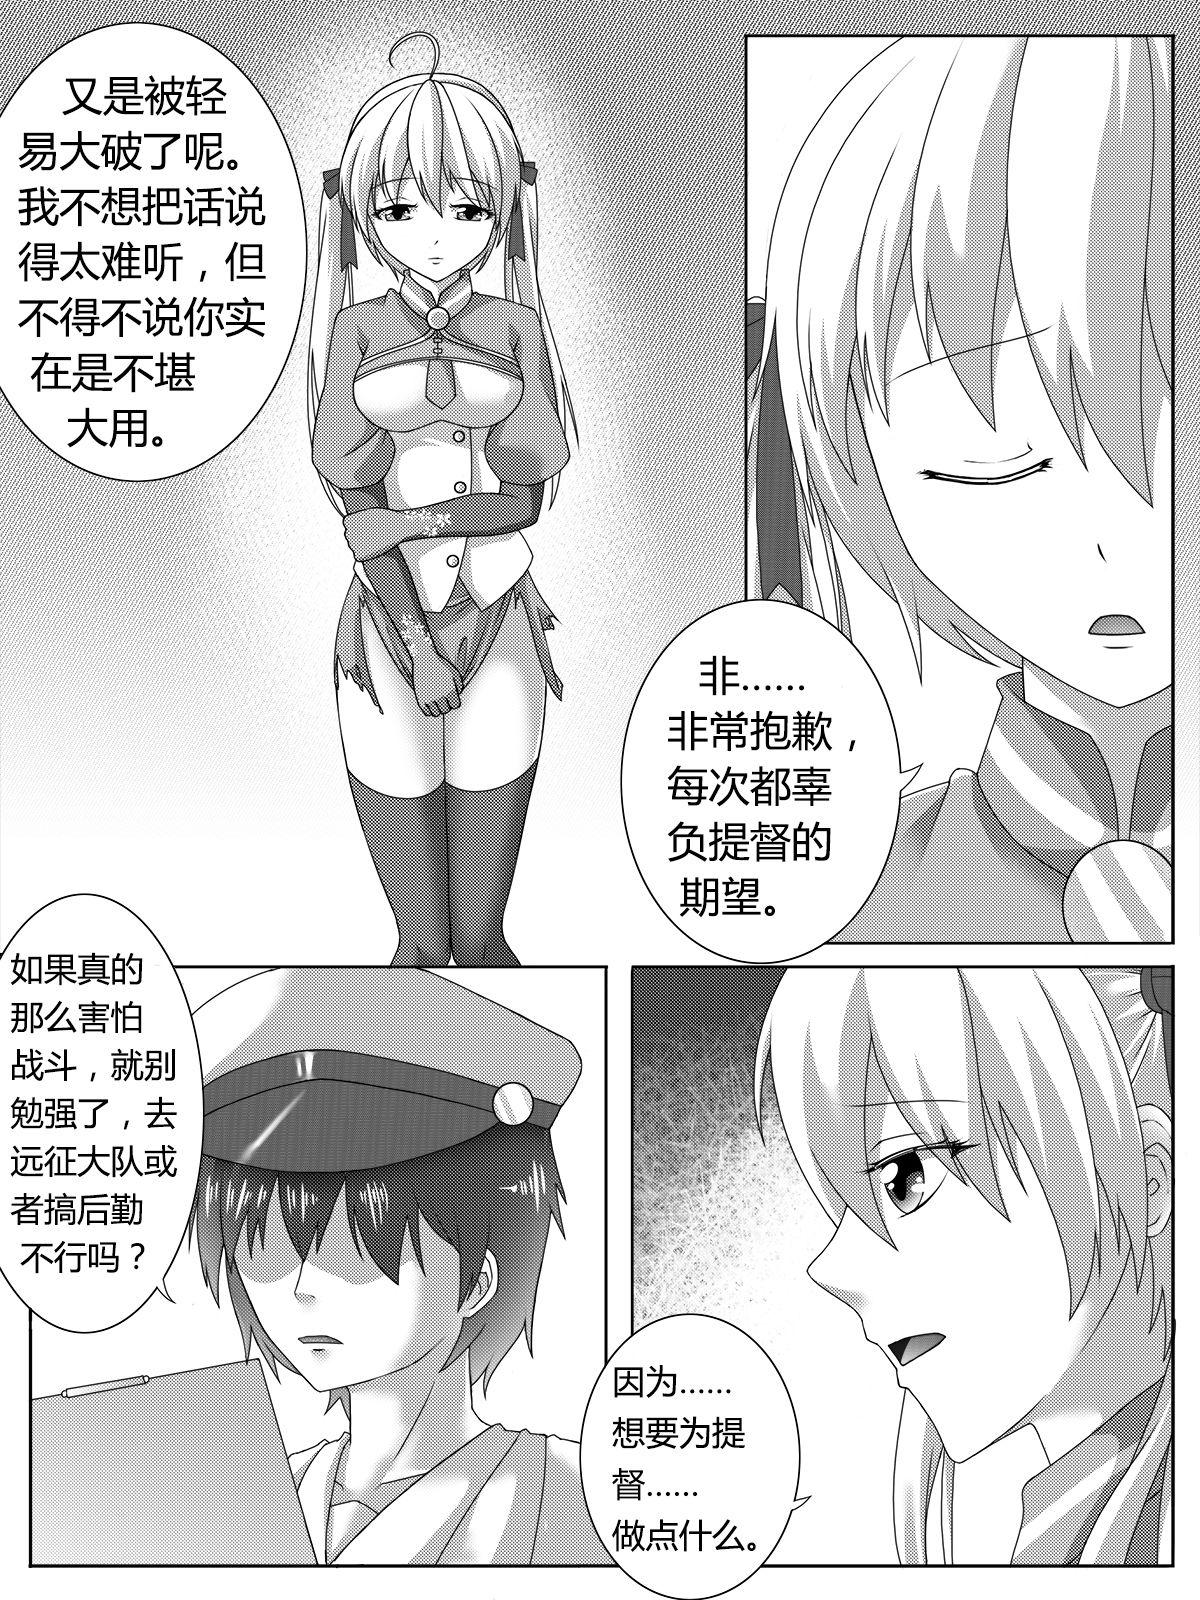 Porn Star Punishment of Ooyodo's Heavily Damage - Warship girls Ghetto - Page 3